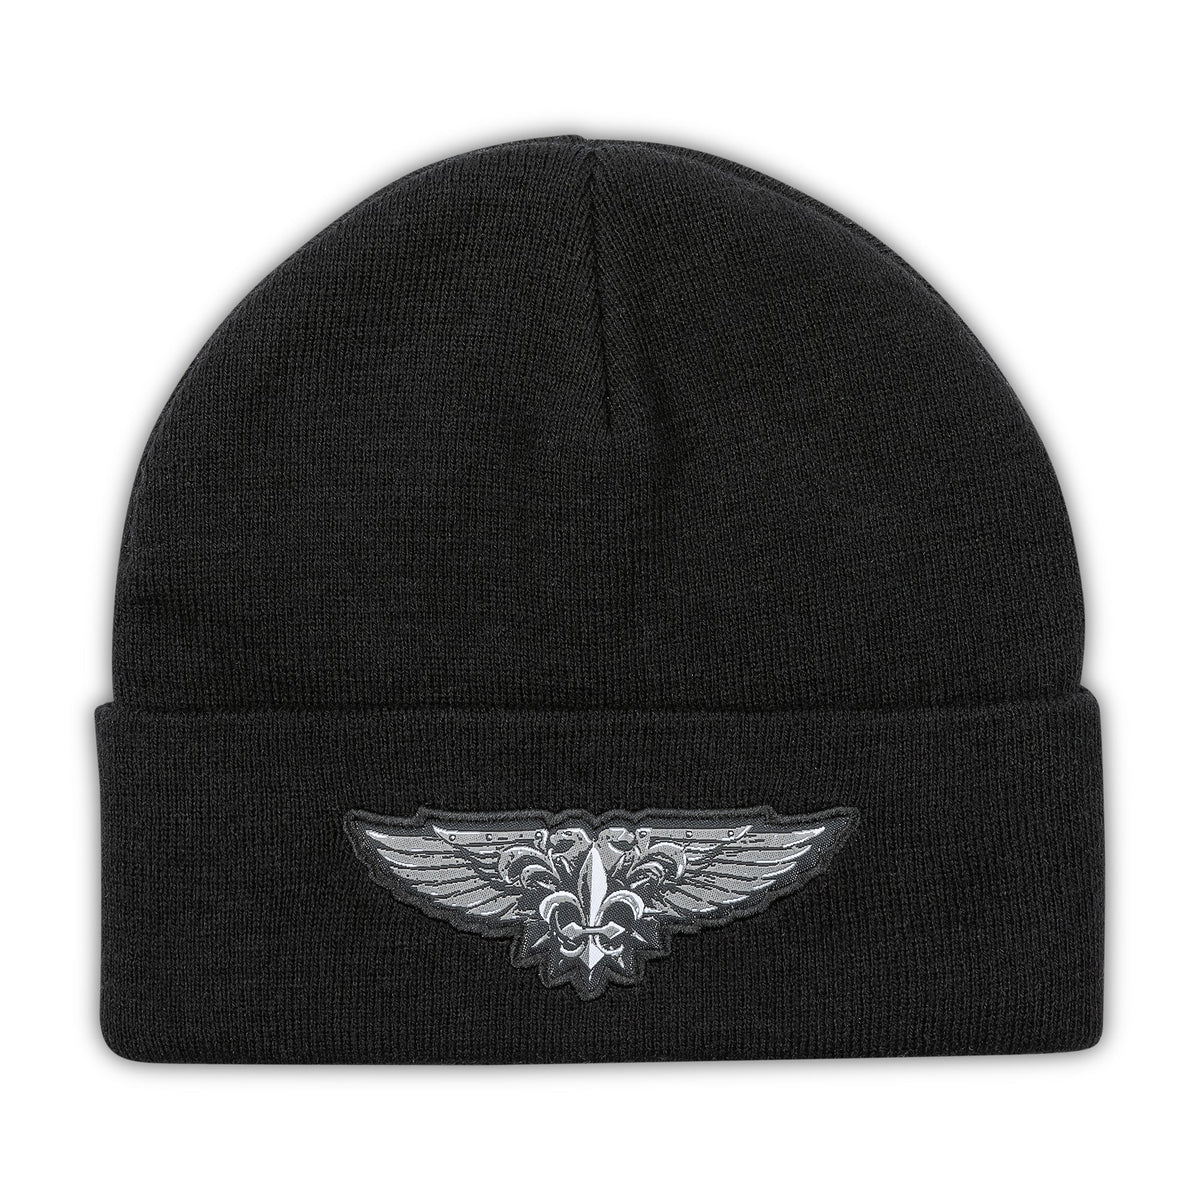 Warhammer 40,000 Imperium of Man Woven Tab Adults Beanie